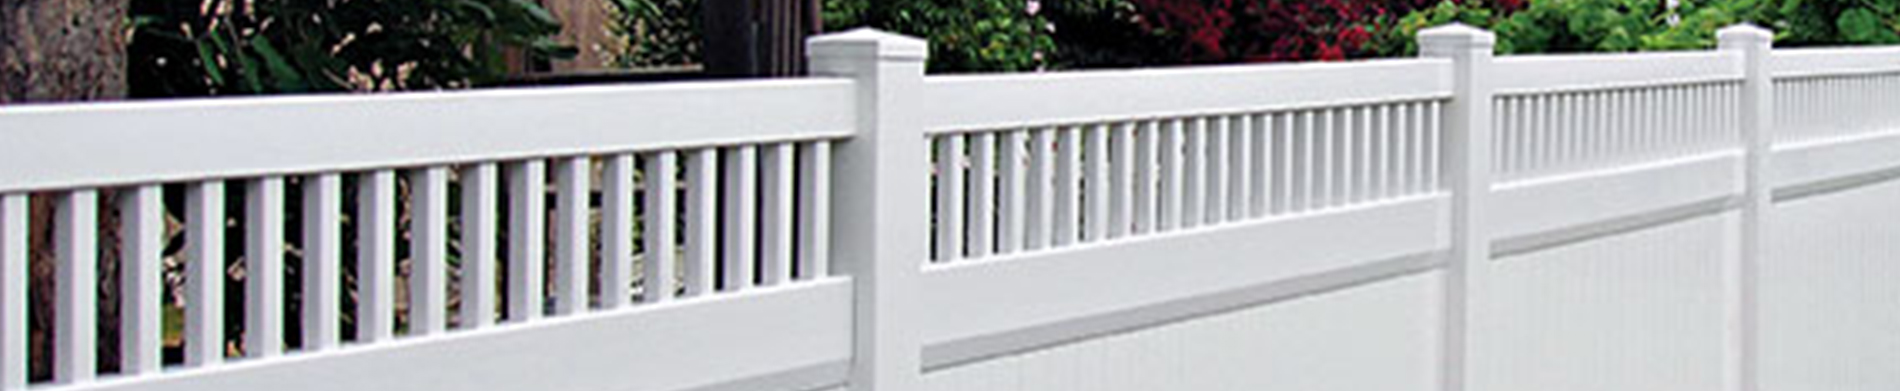 Washington Fence Laws – All You Need To Know Before Installing a Fence